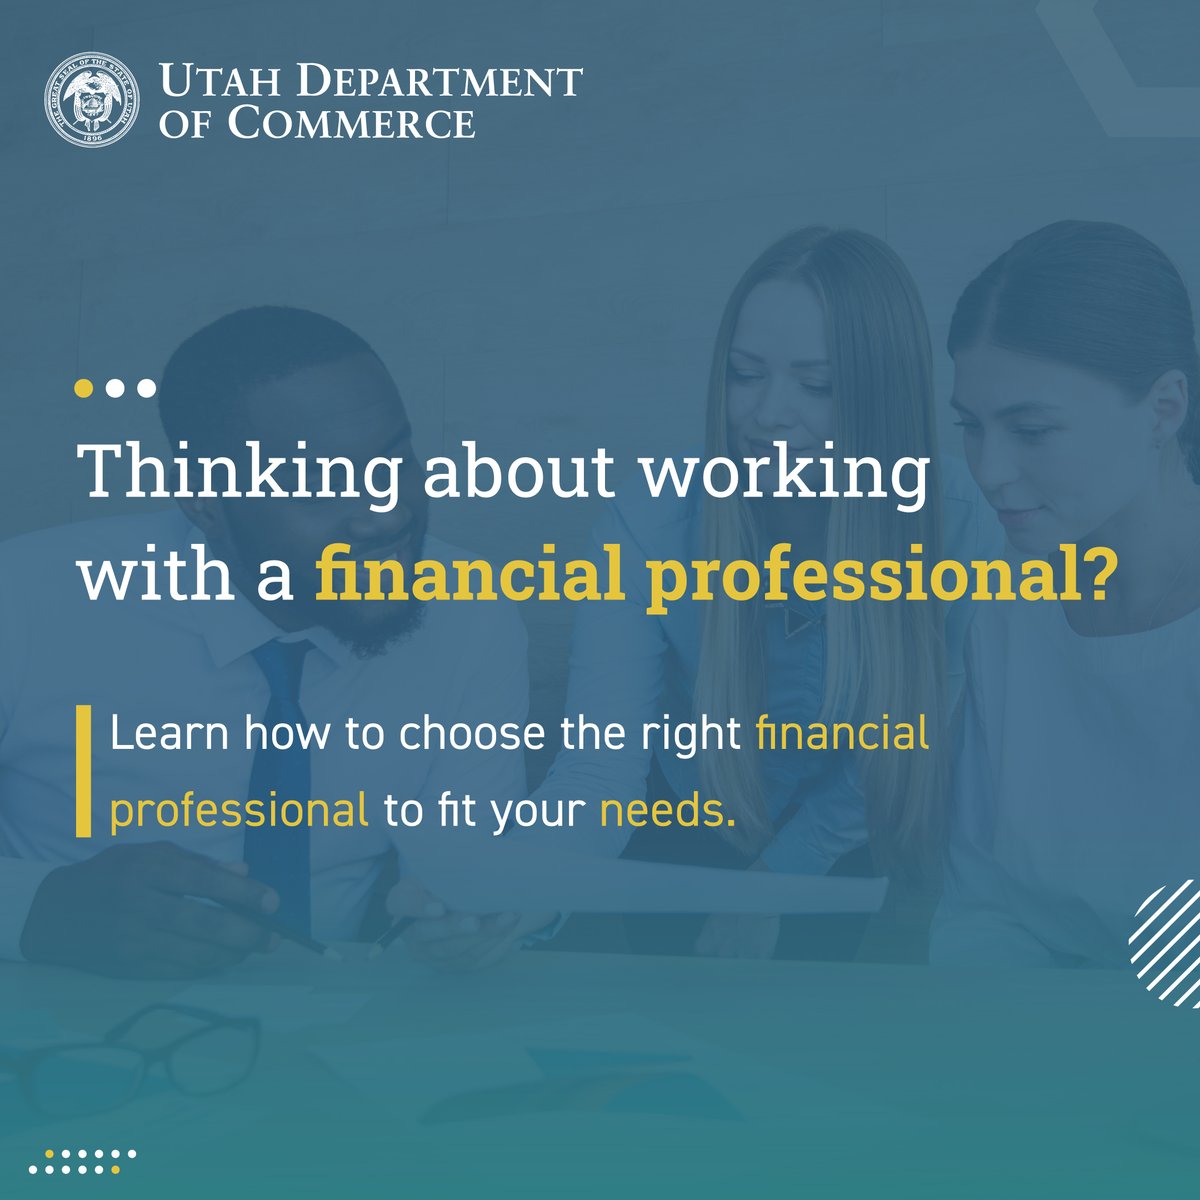 Looking to work with a financial professional but need help figuring out where to start? Check out these videos on choosing the right financial professional to fit your needs and learn how to make the best decision for your financial journey: investor.gov/introduction-i….